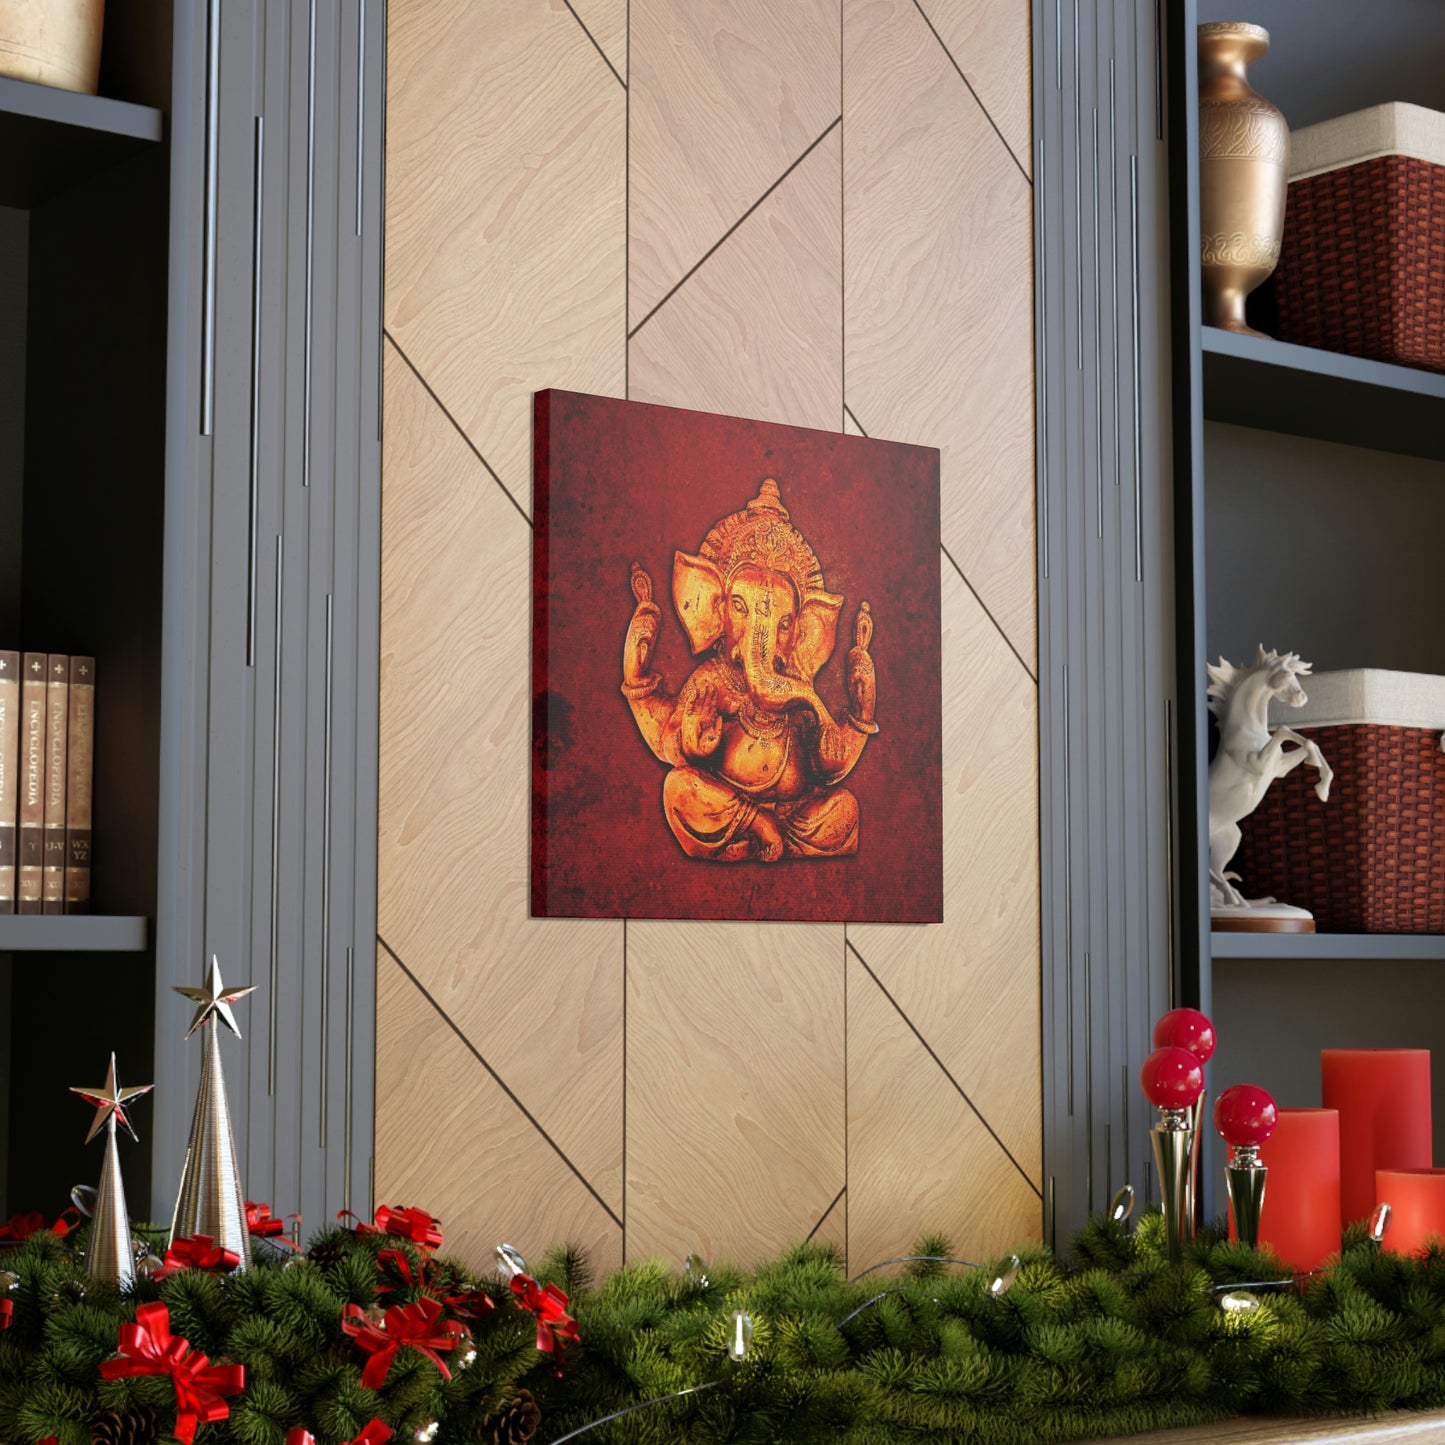 Hinduism Themed Wall Art - Ganesha on a Distressed Lava Red Background Print on Unframed Stretched Canvas